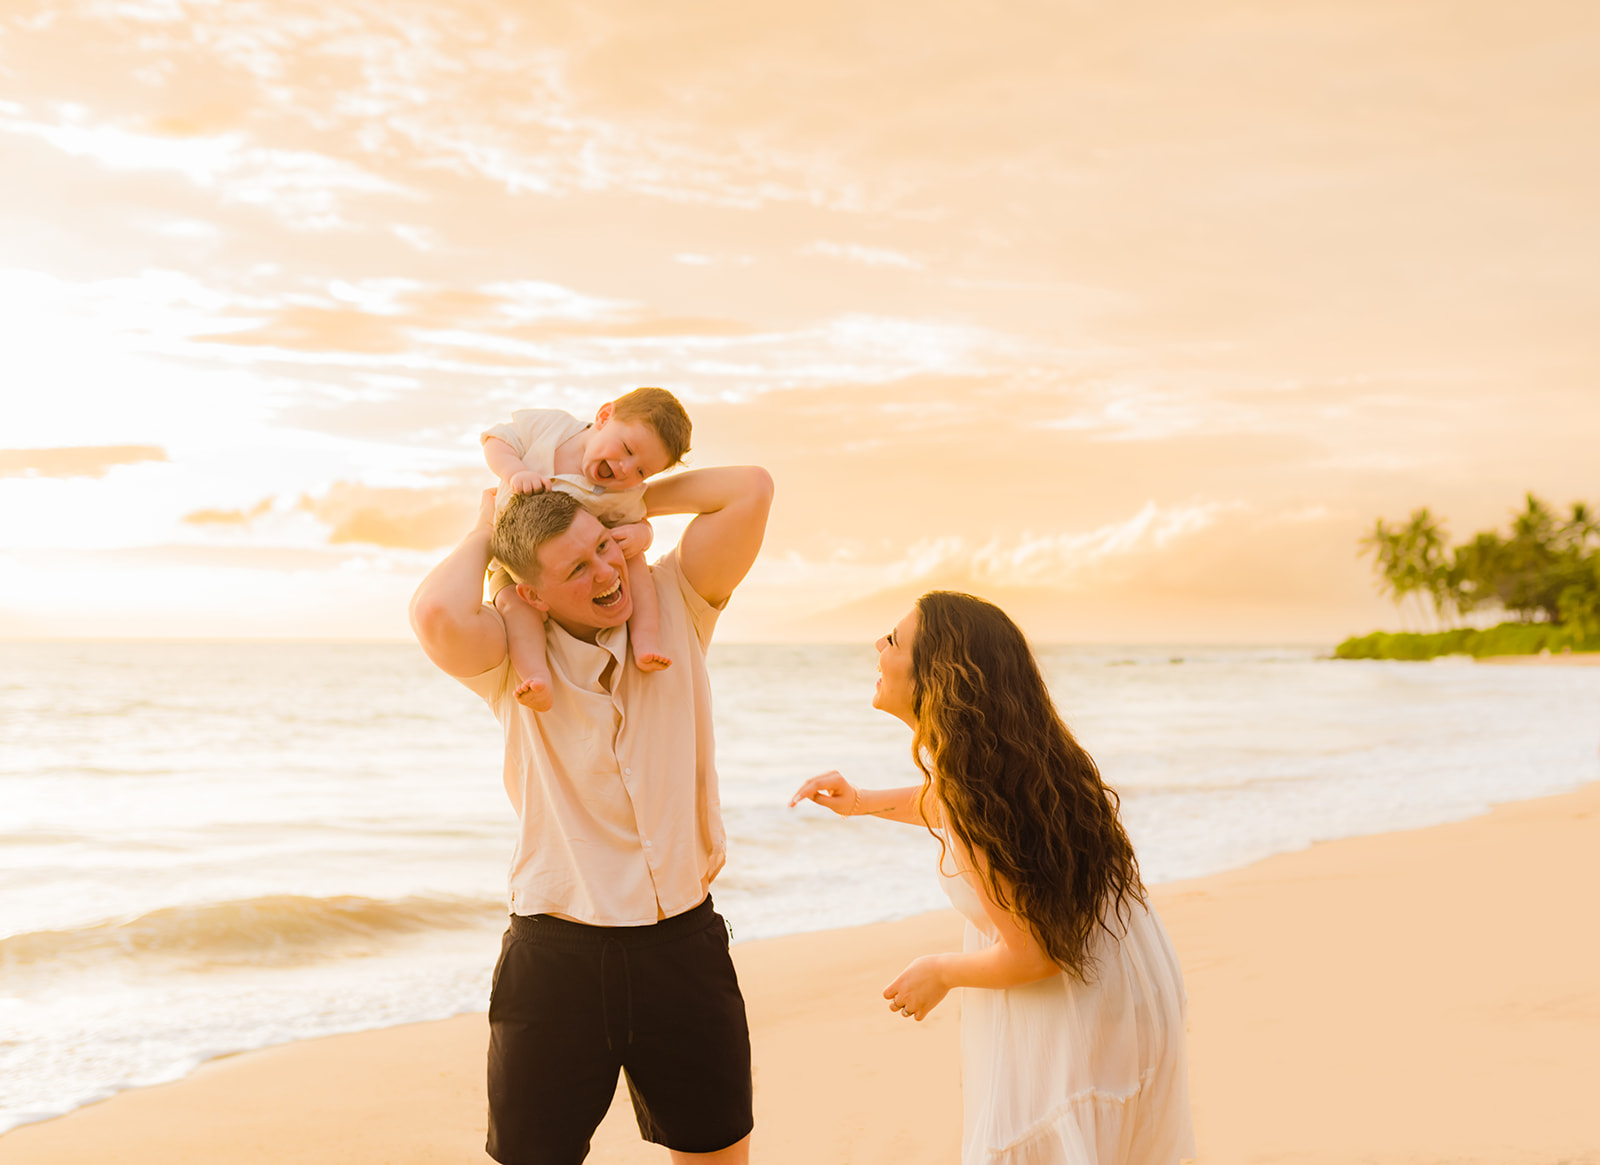 A family playing together during family beach pictures on Hawaii at sunrise.